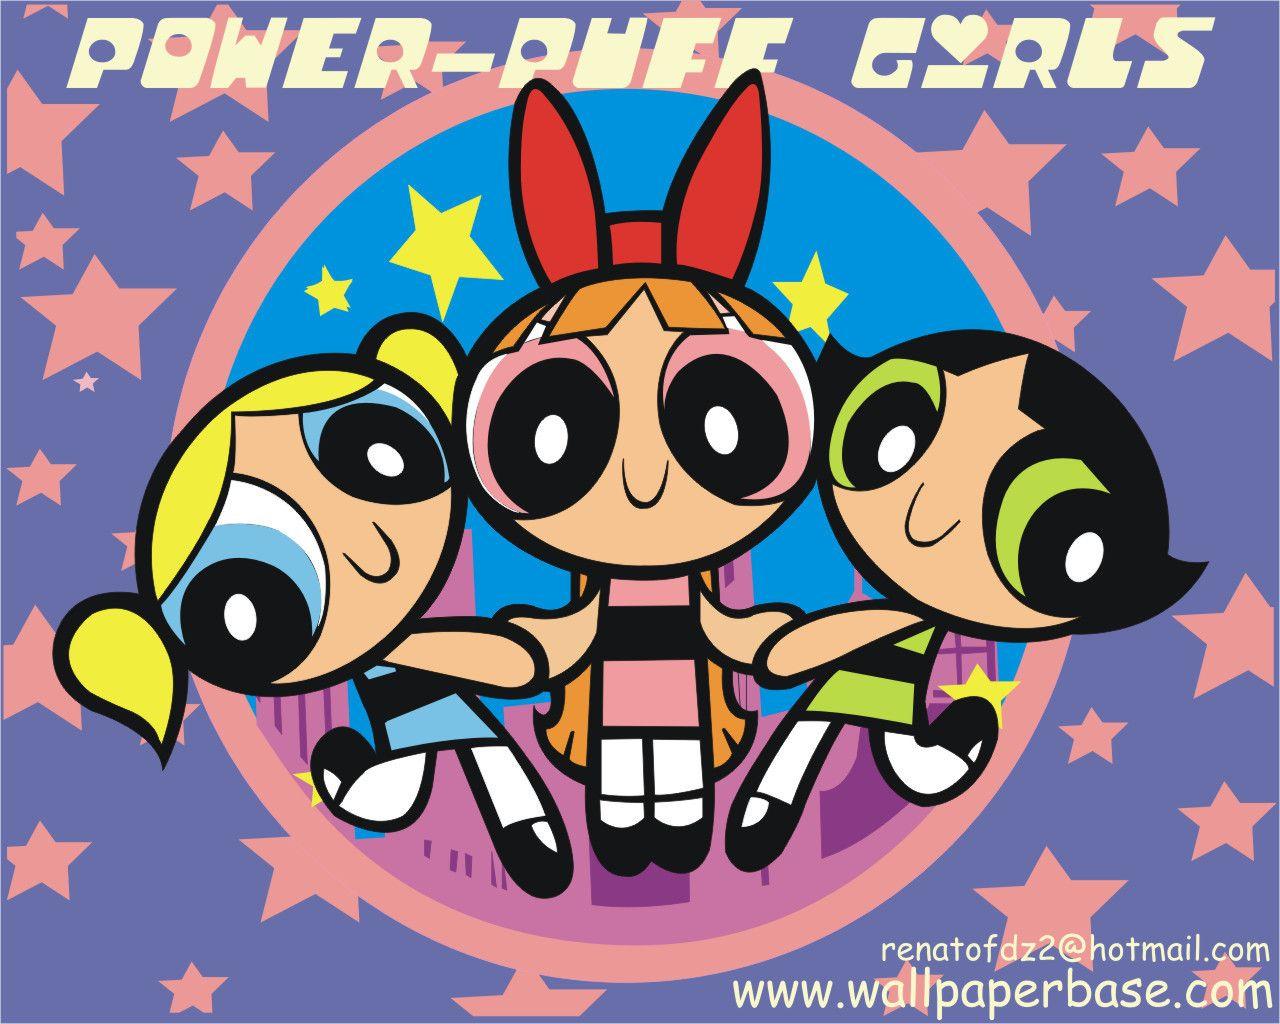 Old Cartoon Network, Nick, and Disney Shows image PPG HD wallpaper